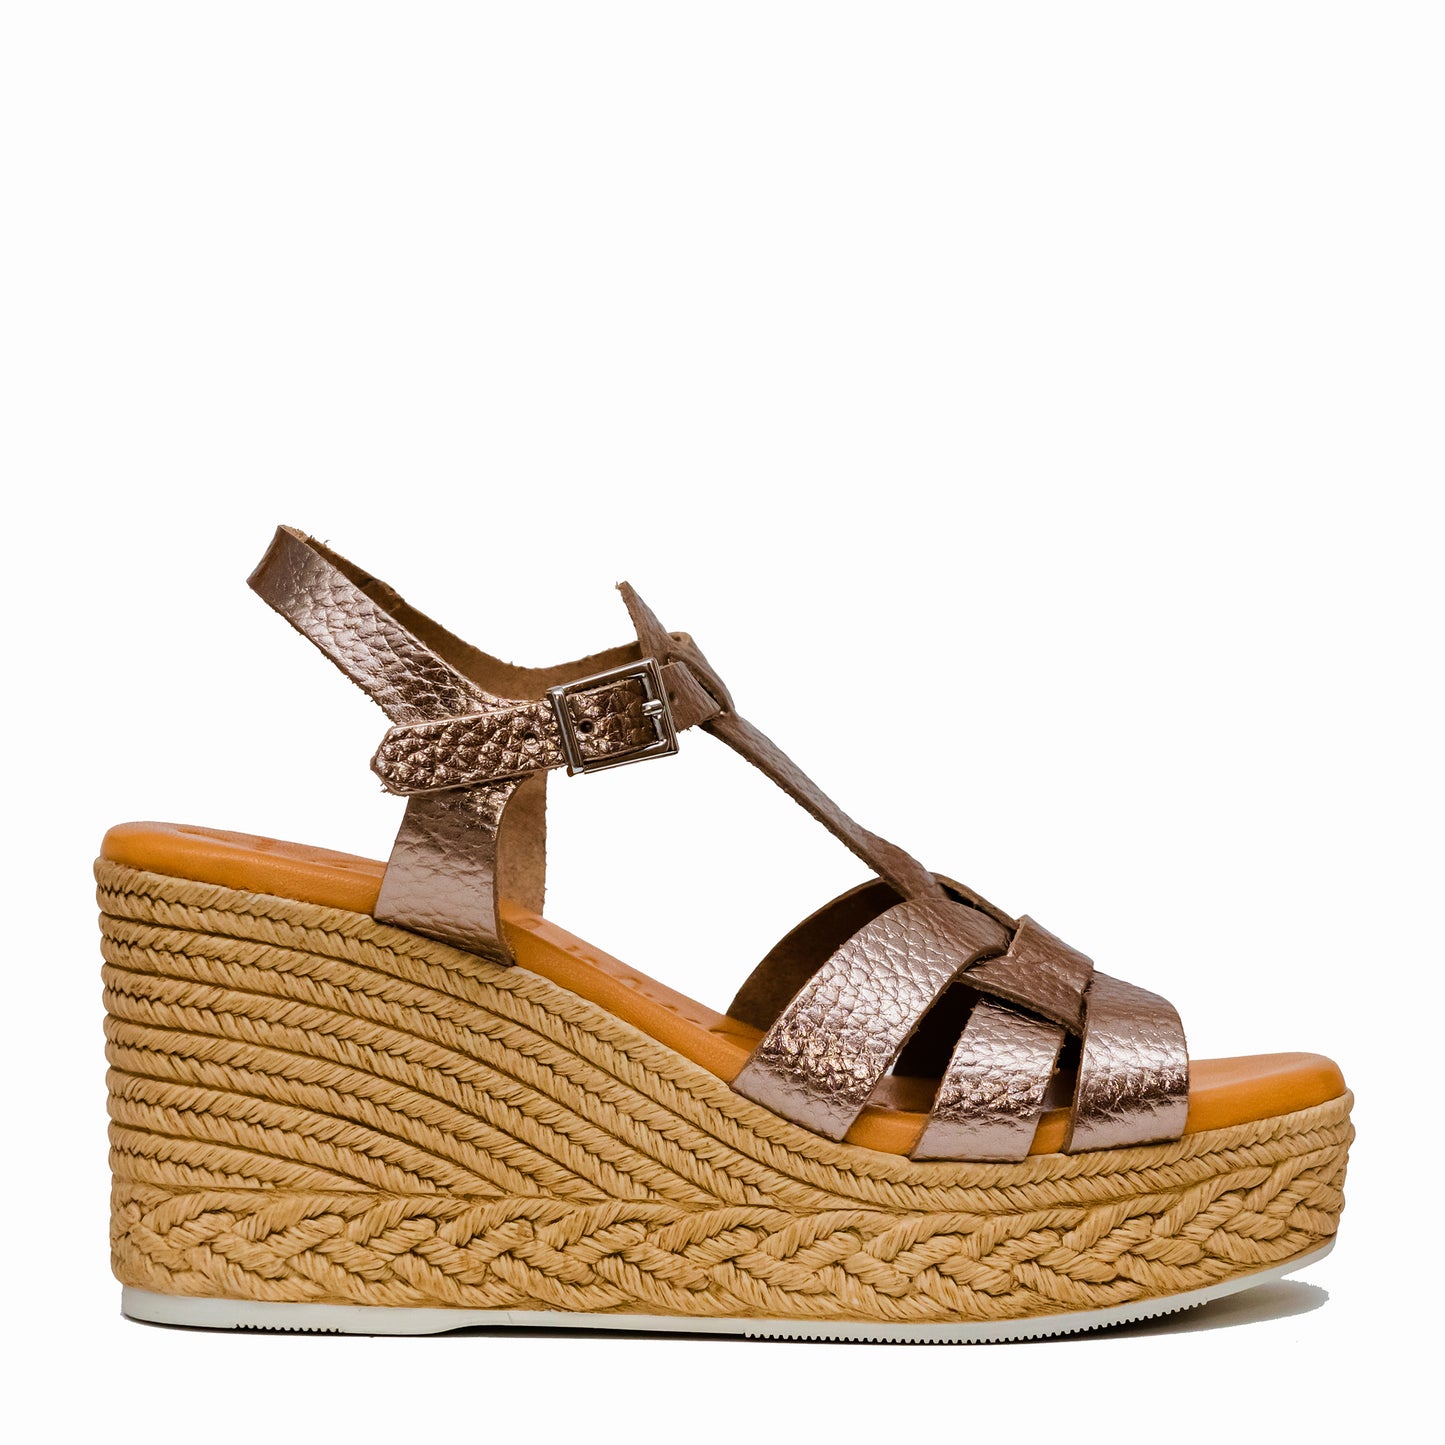 Oh My Sandals 5225 Gold Wedge Sandals